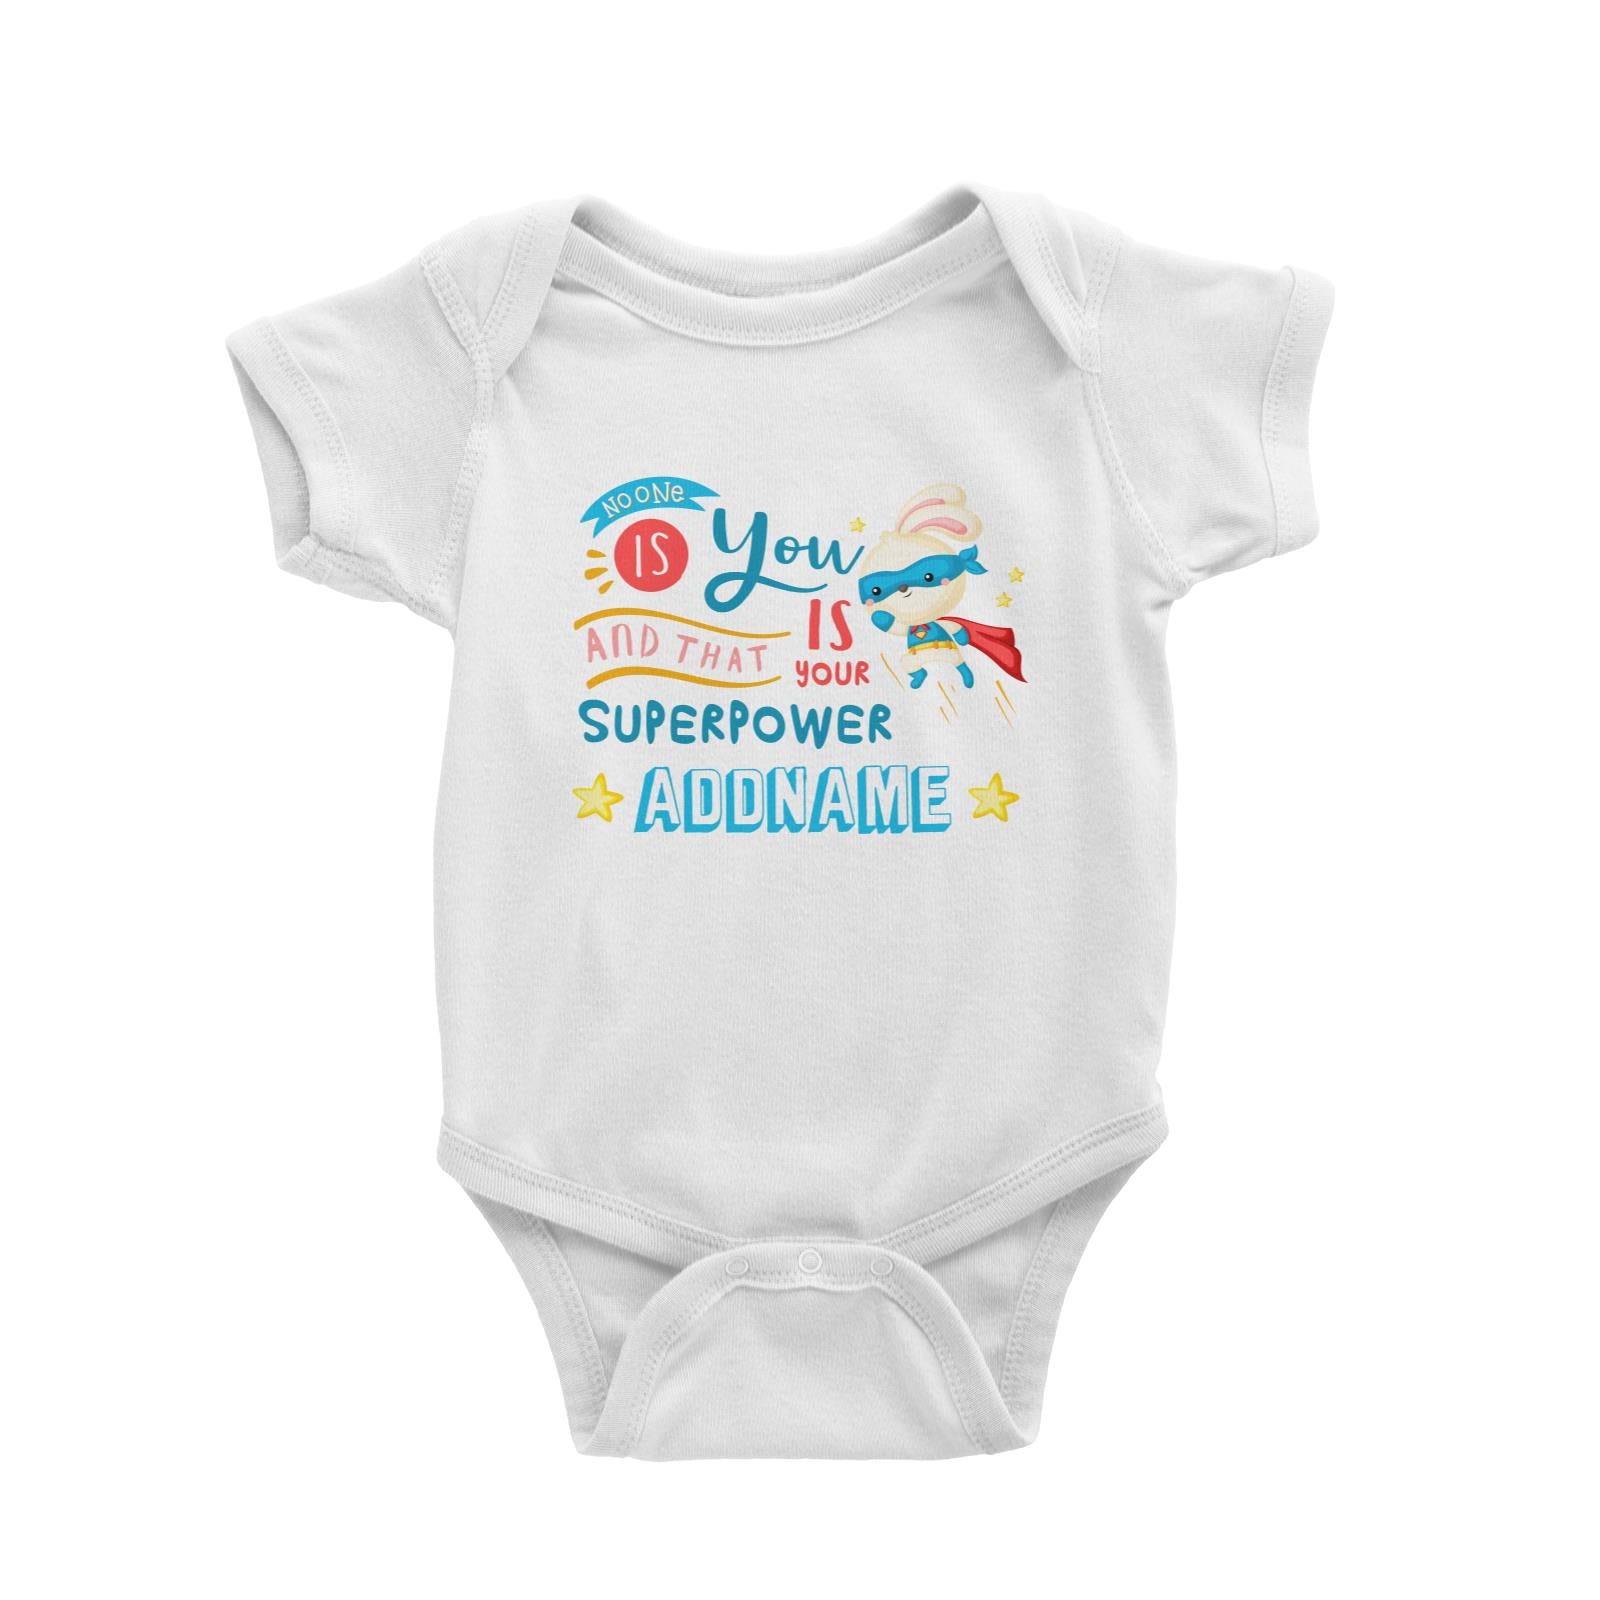 Children's Day Gift Series No One Is You And That Is Your Superpower Blue Addname Baby Romper